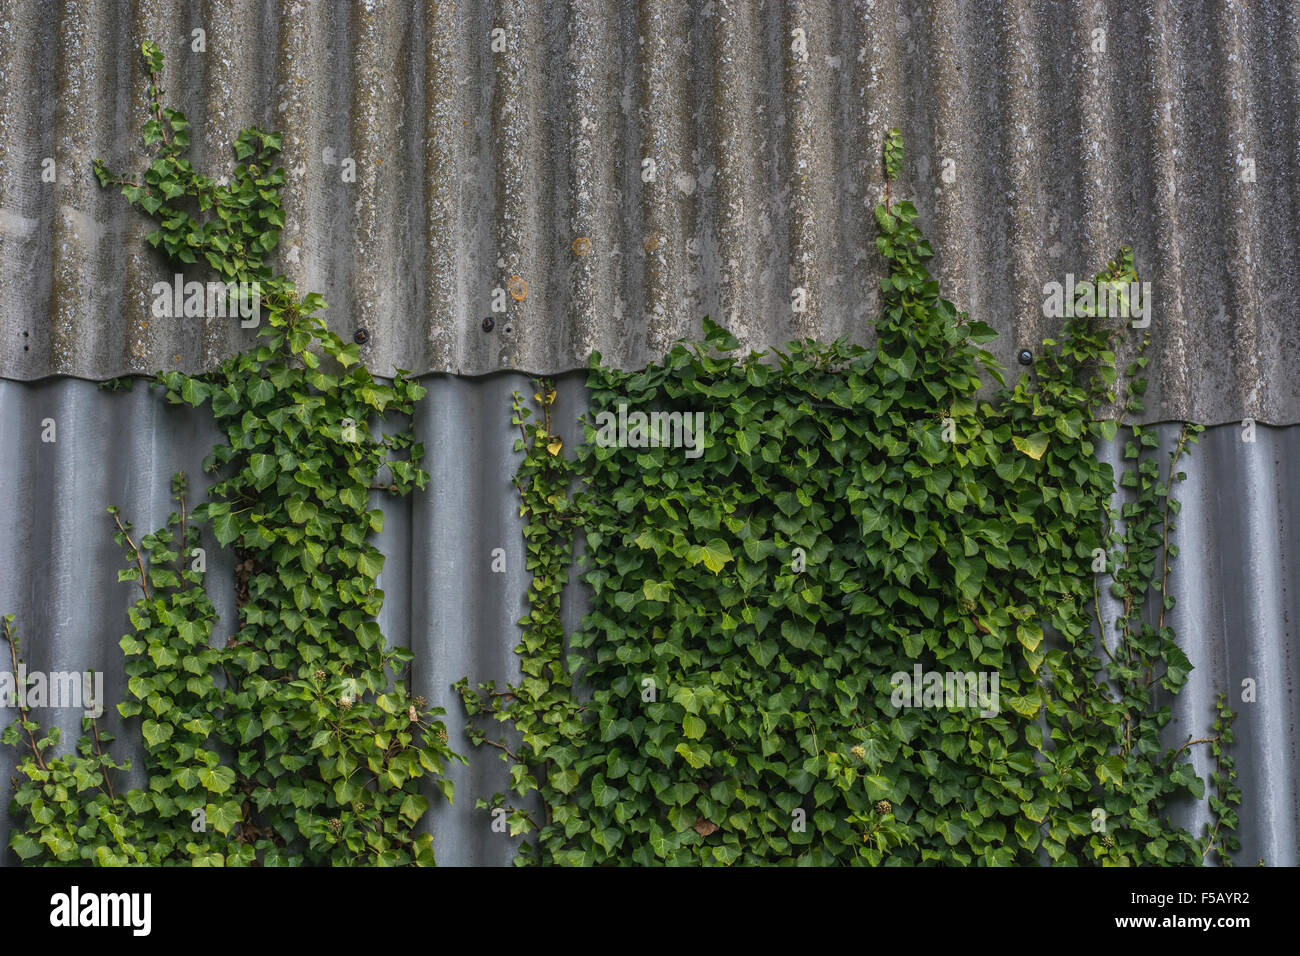 Common Ivy / Hedera helix] creeping up wall in forgotten corner of commercial factory site. Climb / climbing concept, overgrown by weeds, creeping ivy Stock Photo